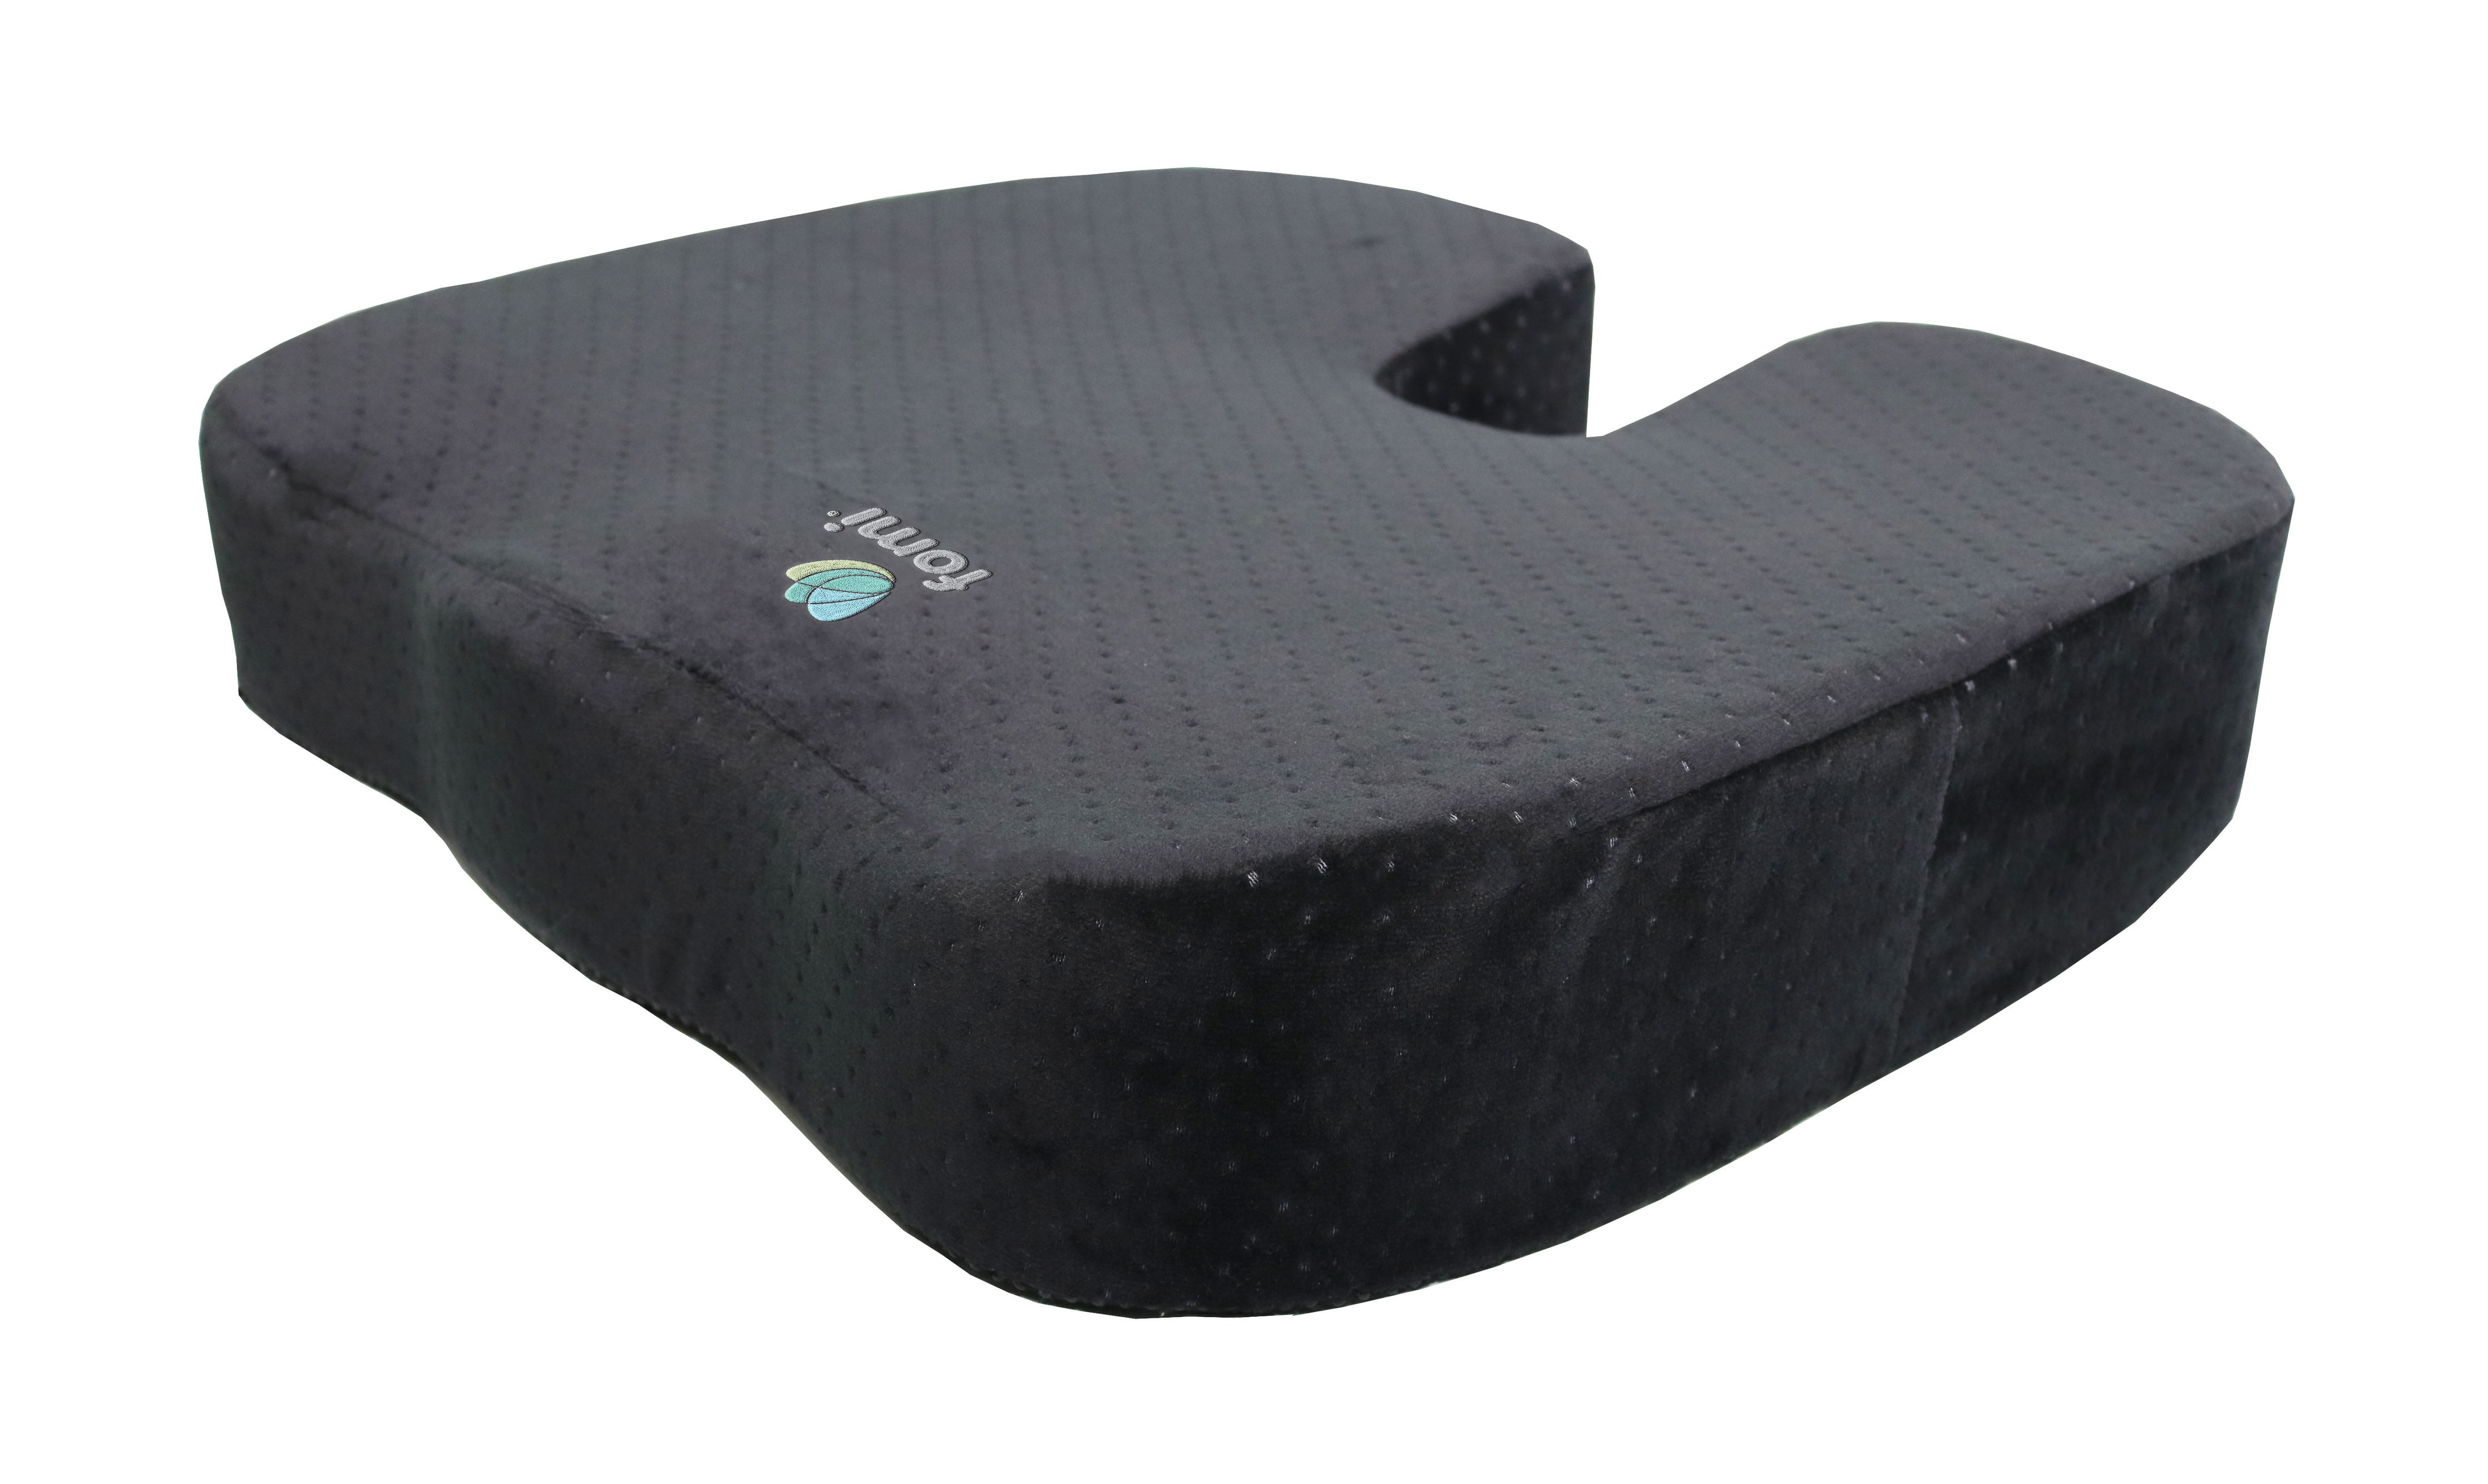 CNDT Gel Cool Memory Foam Orthopedic Seat Cushion for Office Chair Car Driver Airplane Help Sciatica Nerve Tailbone Hemorrhoids Back Hip Sitting Pain Relief Black